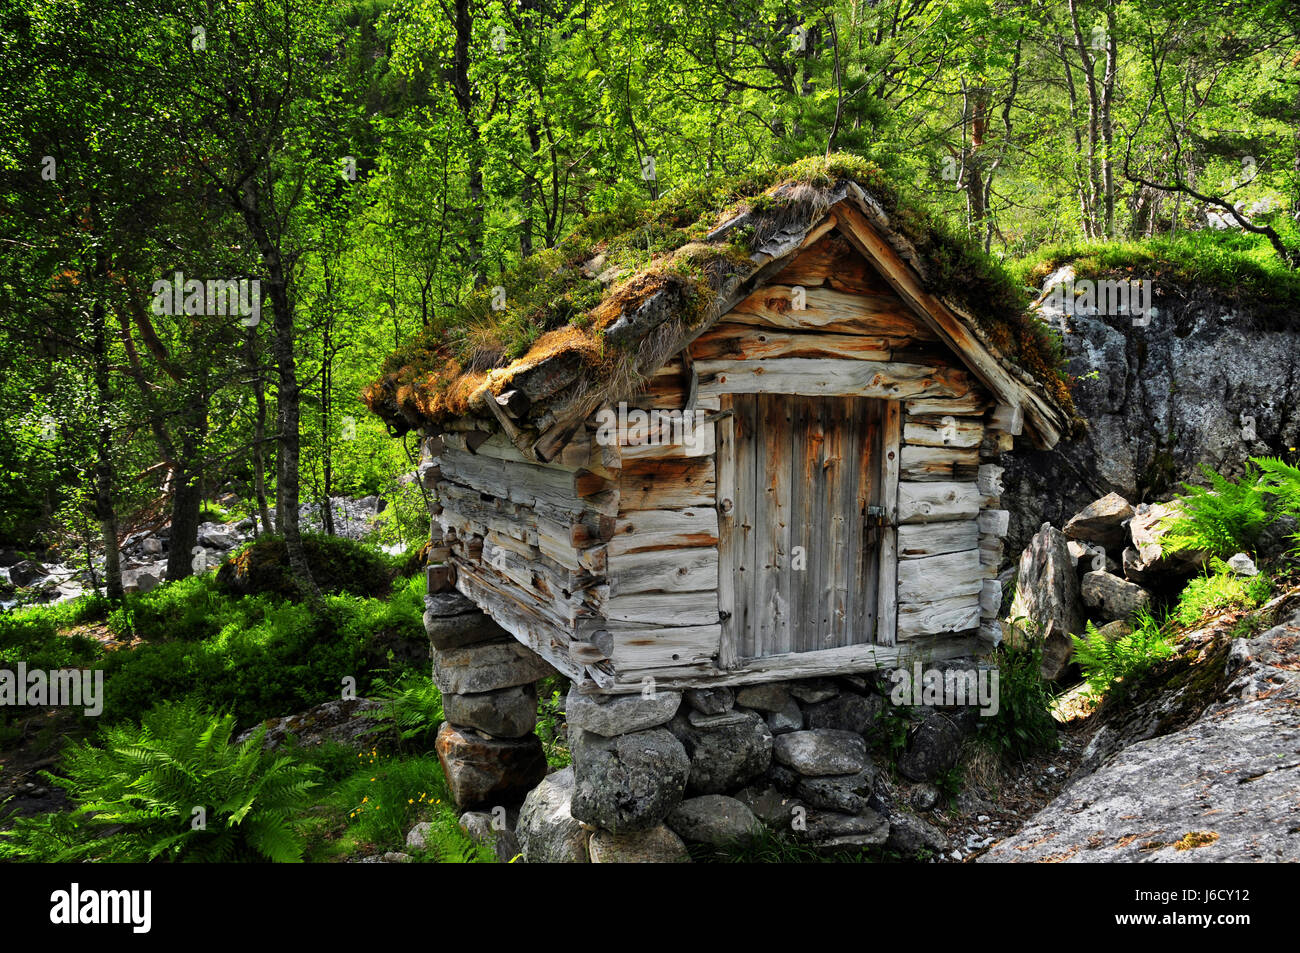 house building norway hovel cottage summerhouse lodge hut house building tree Stock Photo